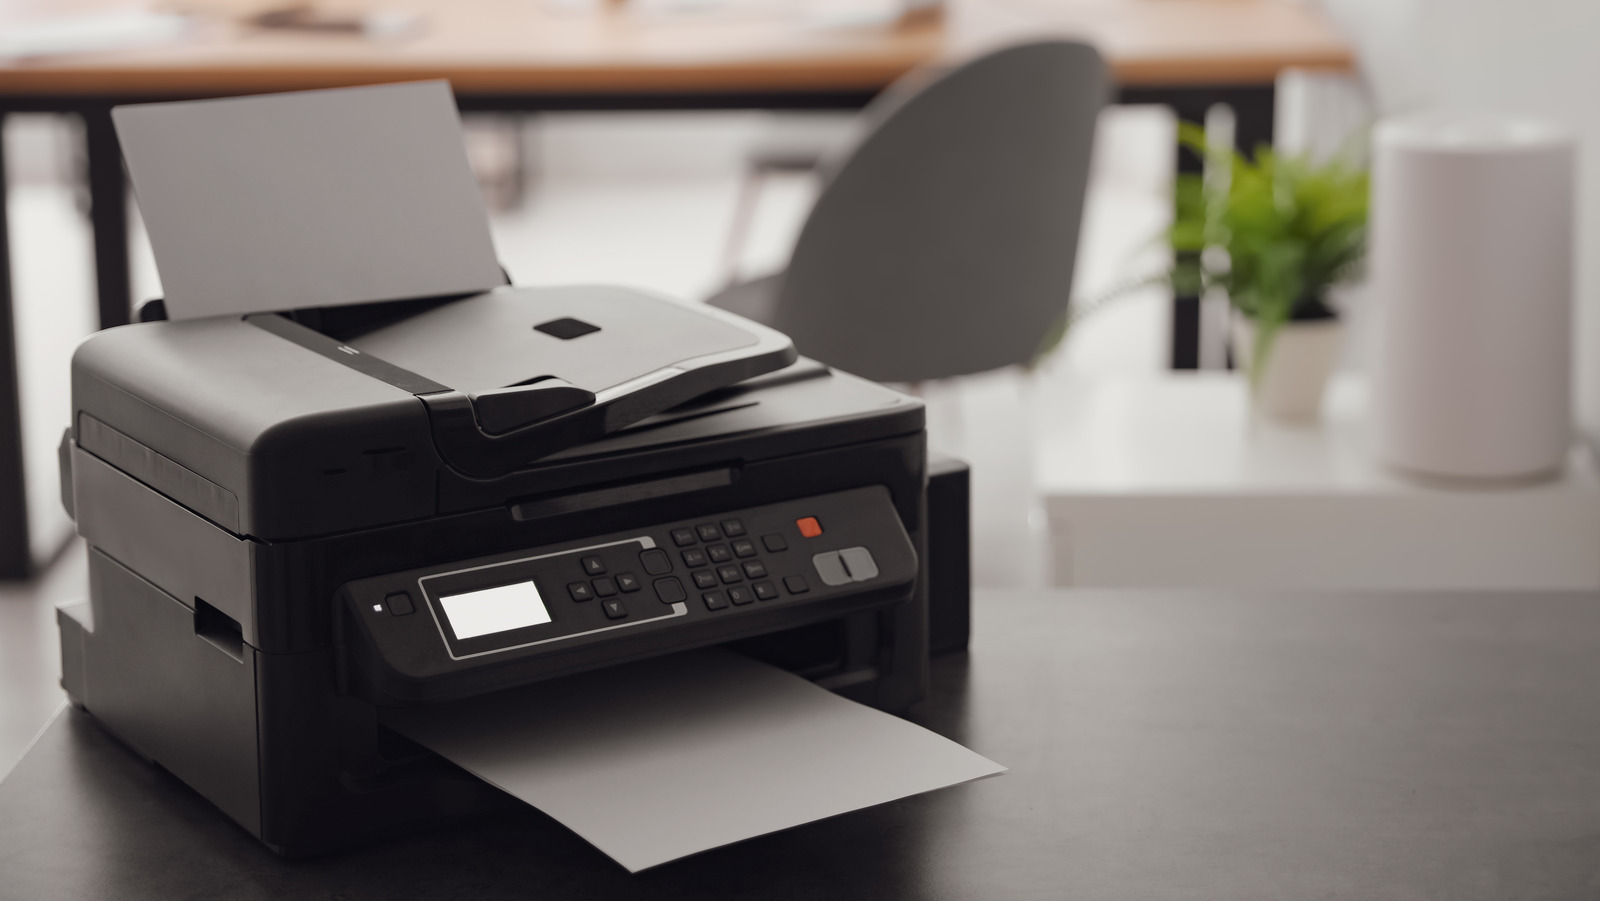 What You Need To Do Before You Get Rid Of Your Fax Machine